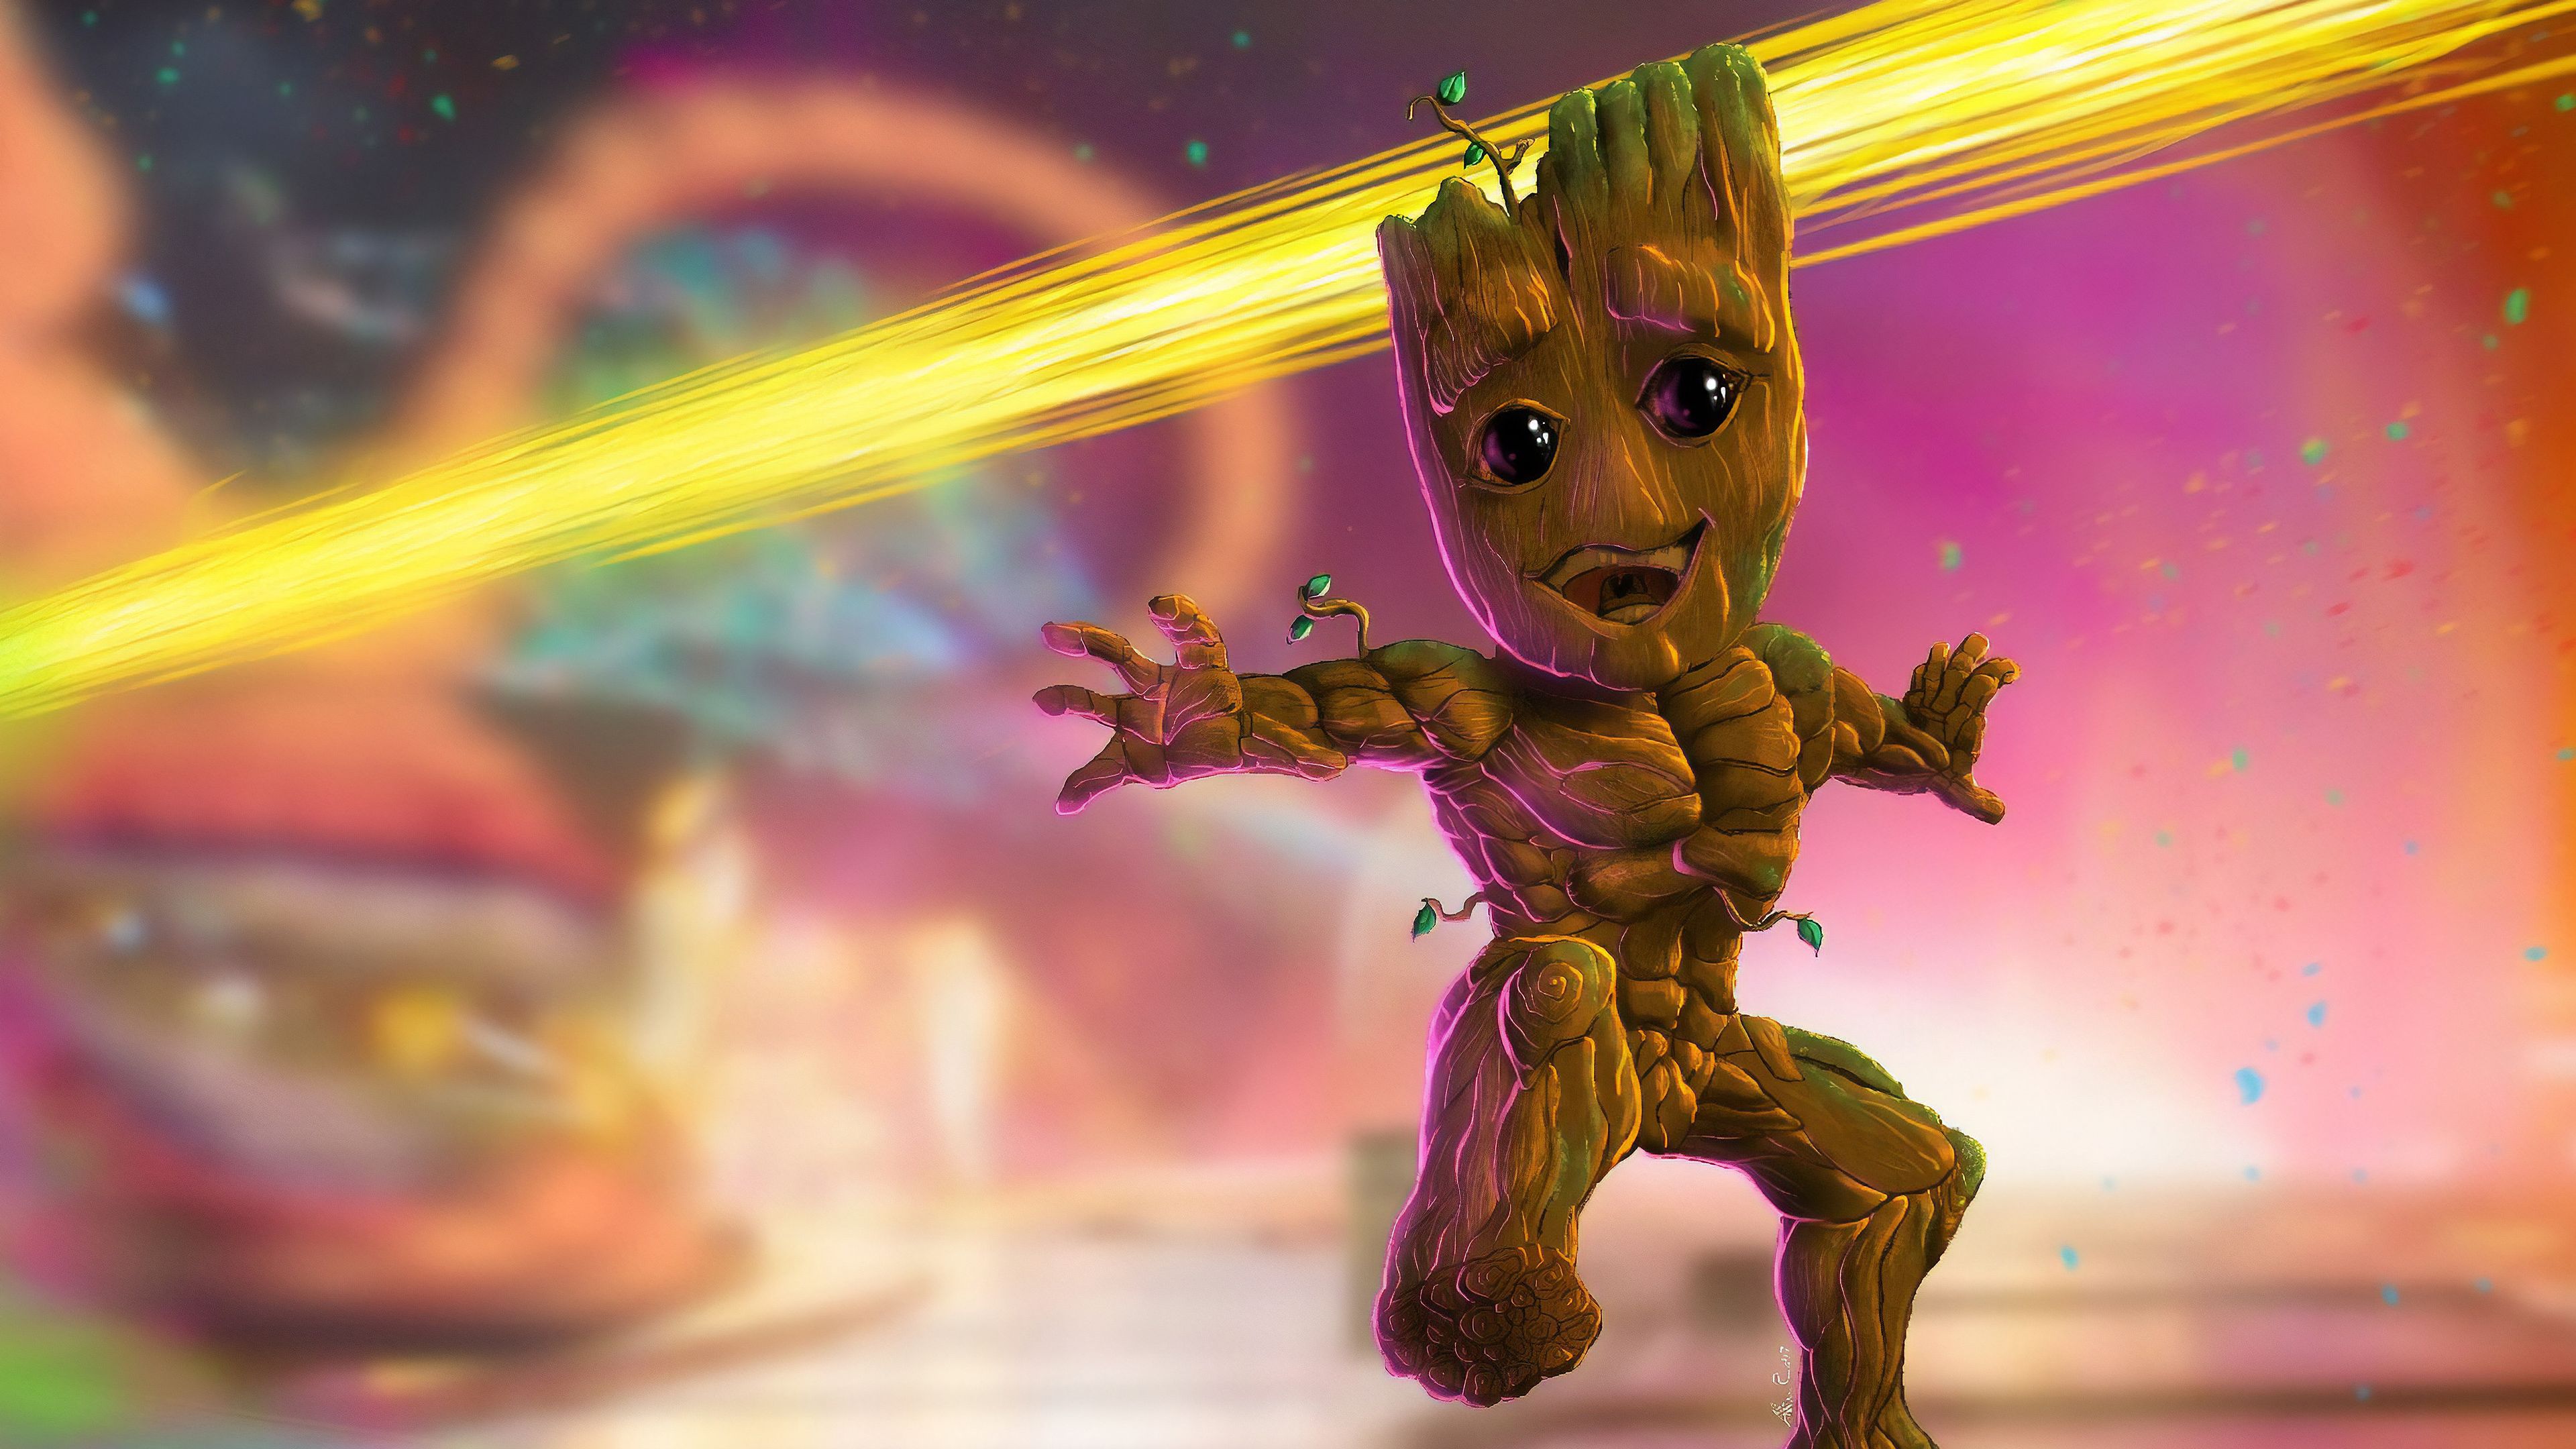 Baby Groot 4k 2019 1440P Resolution HD 4k Wallpaper, Image, Background, Photo and Picture